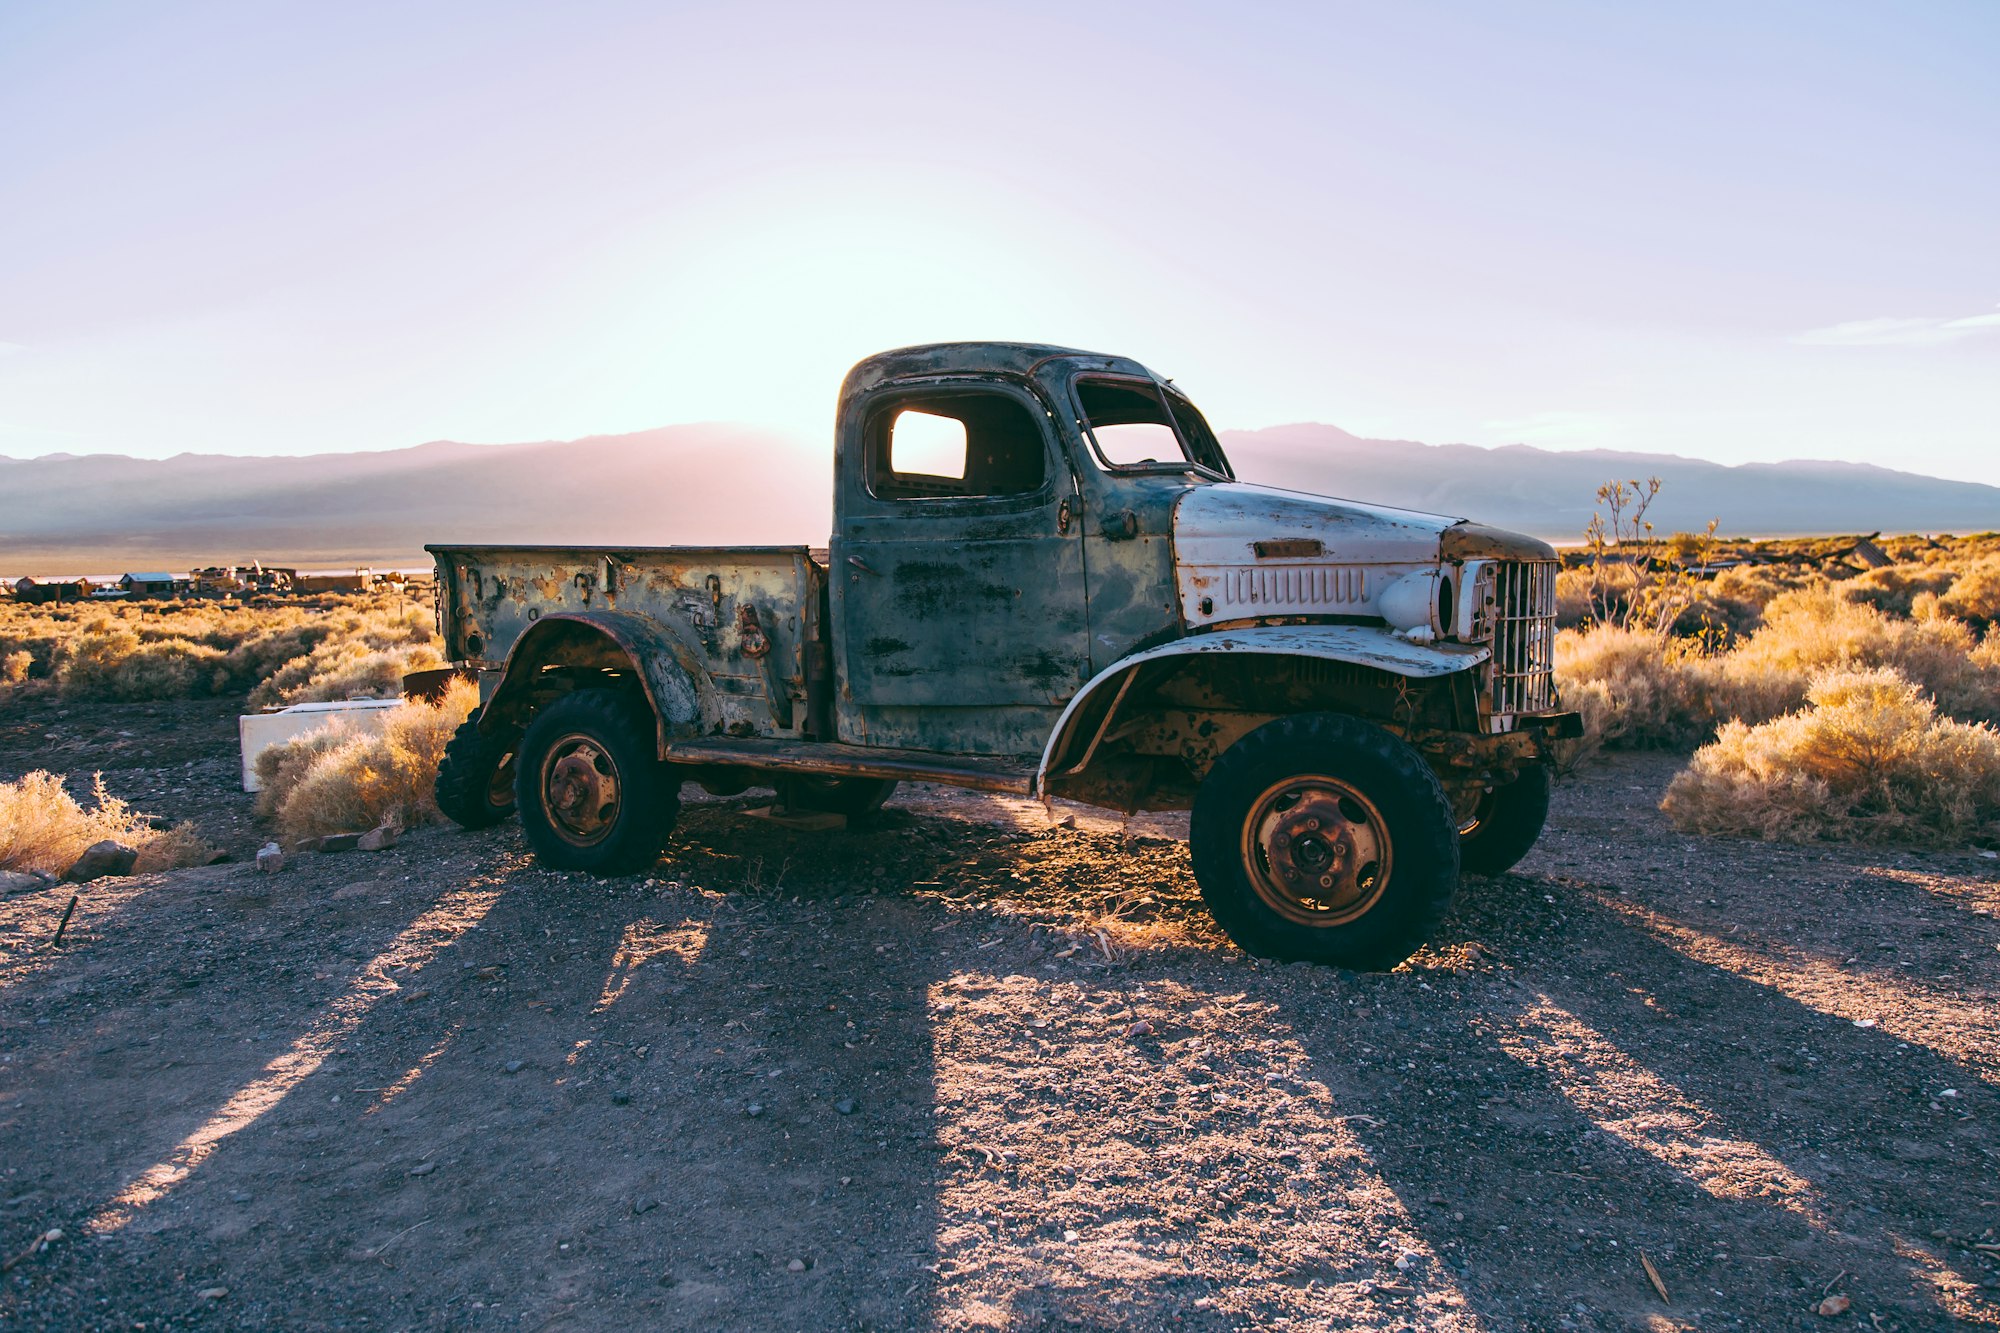 This right here truck used to belong to Charles Manson. It’s been sitting for 41 years baking in the desert sun in the ghost town of Ballarat. Located down a dirt road in the middle of Death Valley about 150 miles Northeast of Los Angeles.